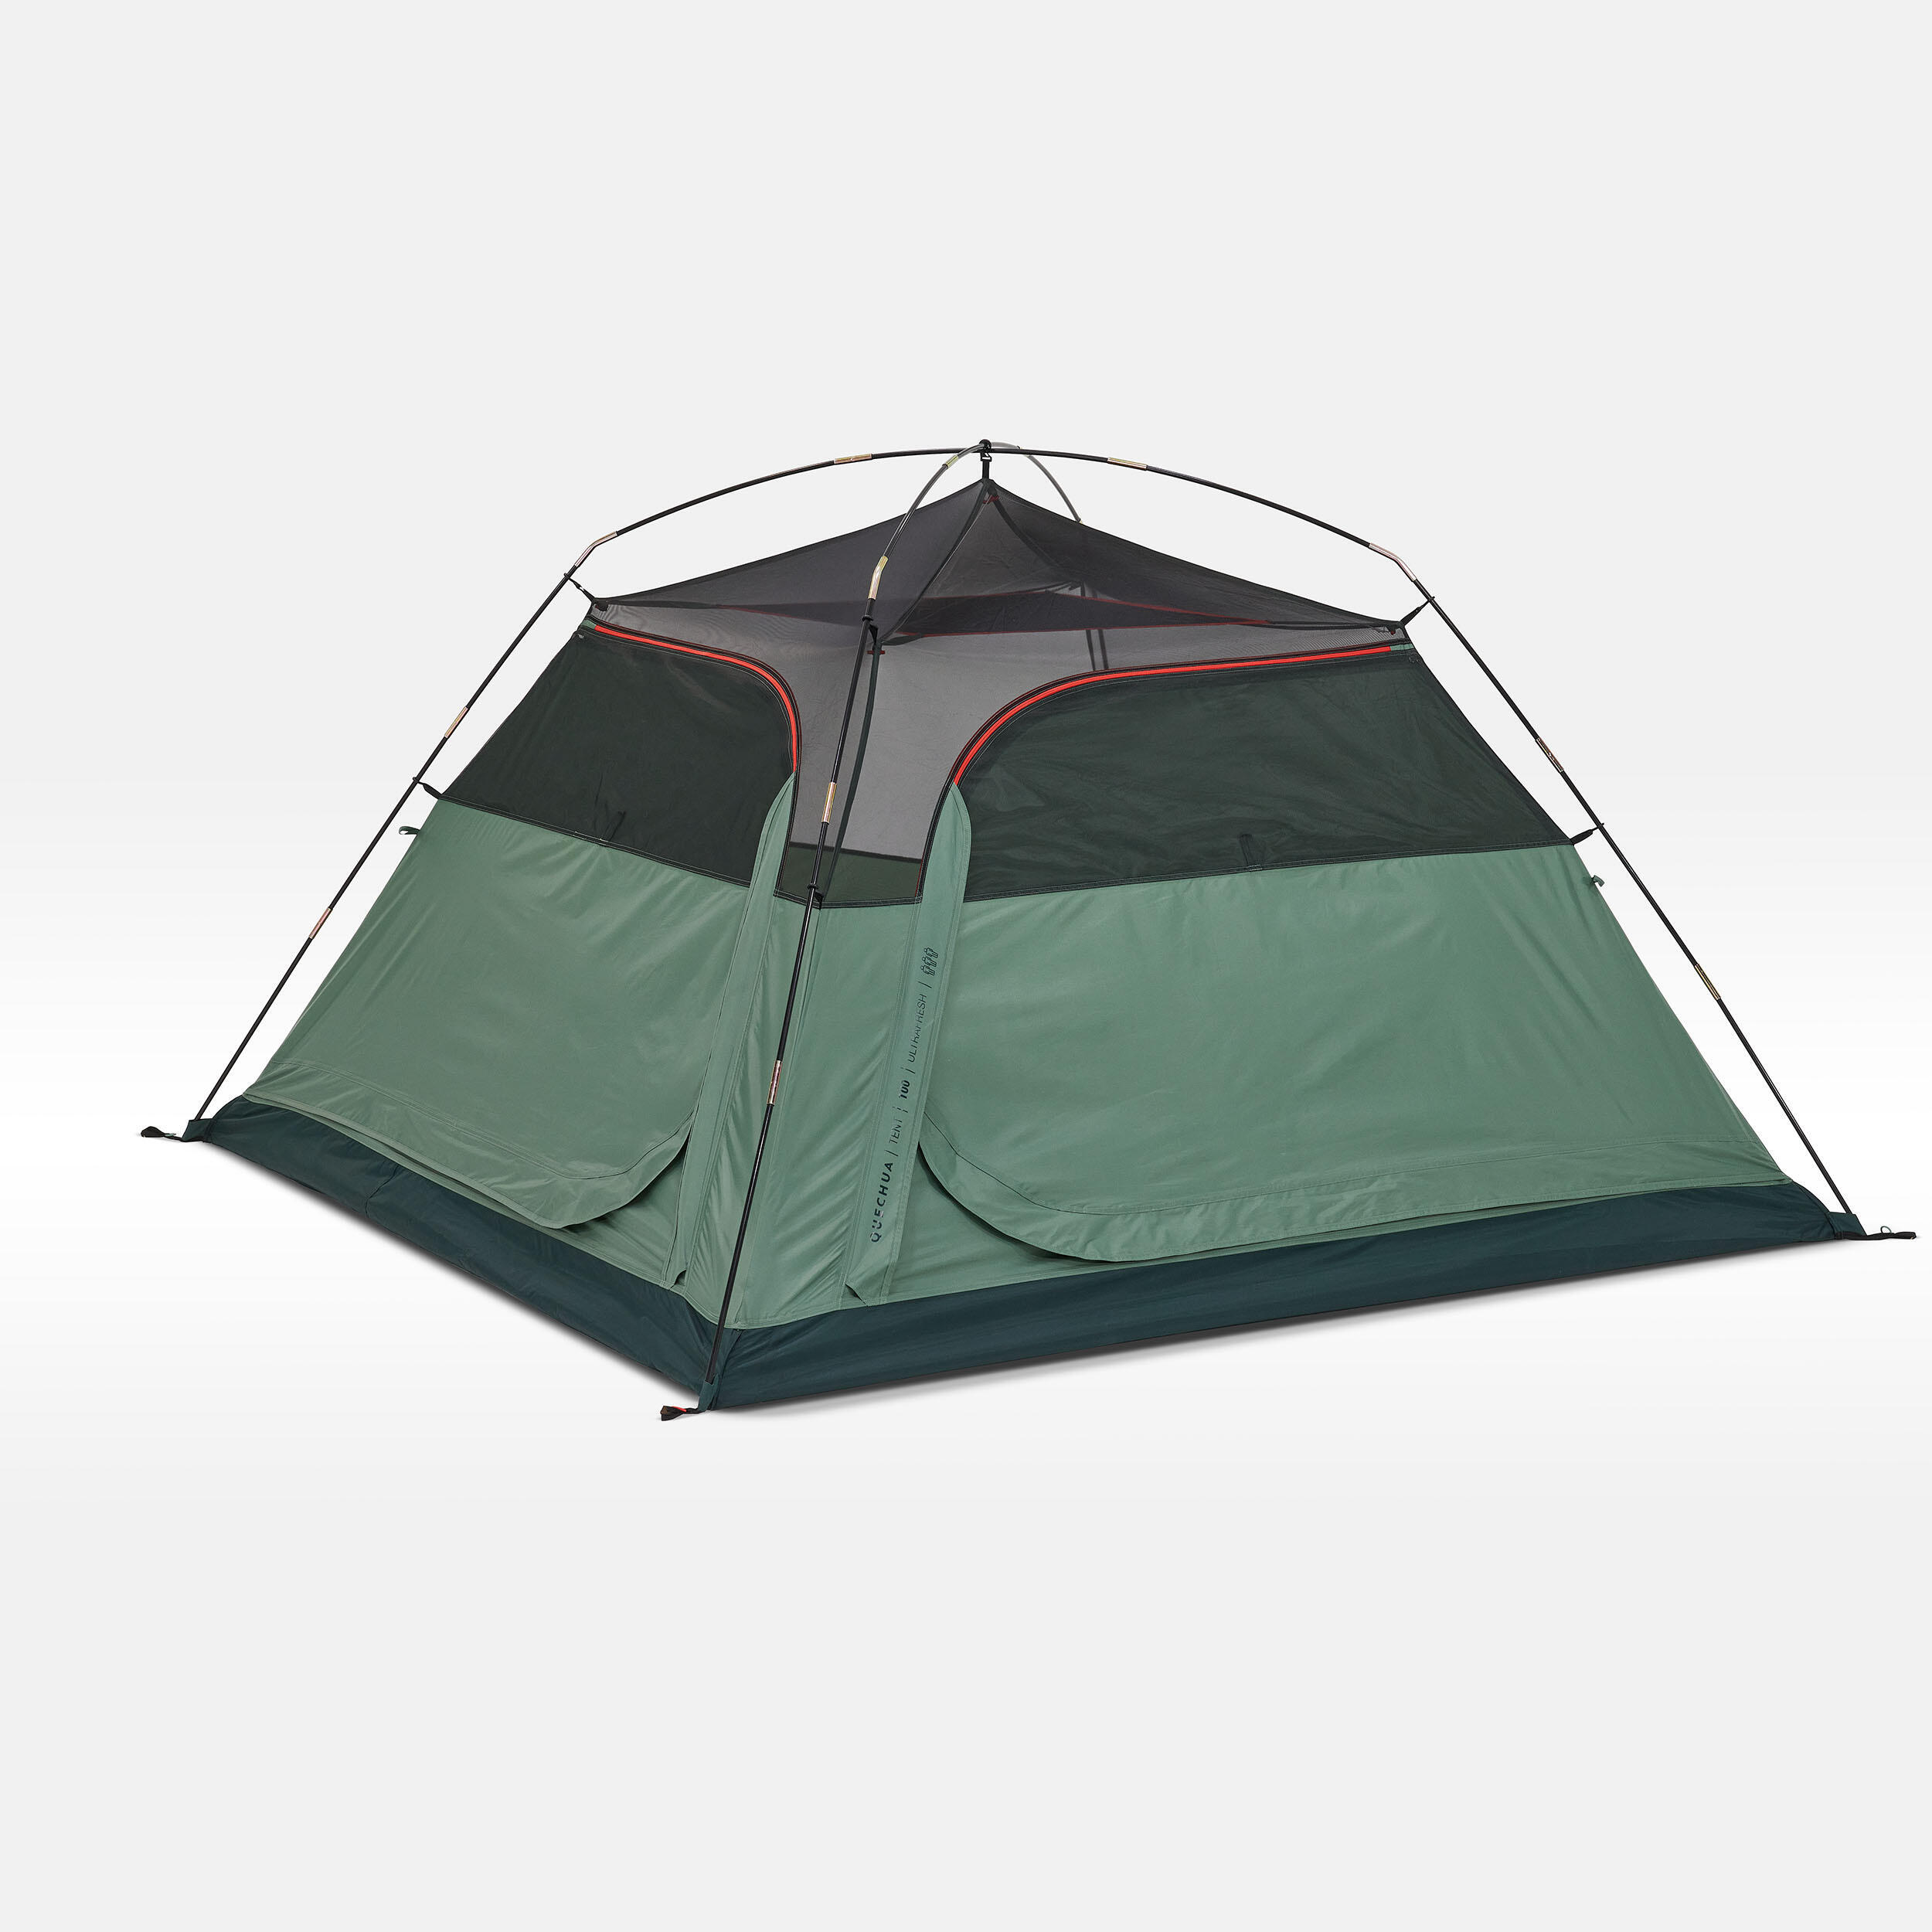 Camping tent - MH100  - 3-person - Fresh 21/24